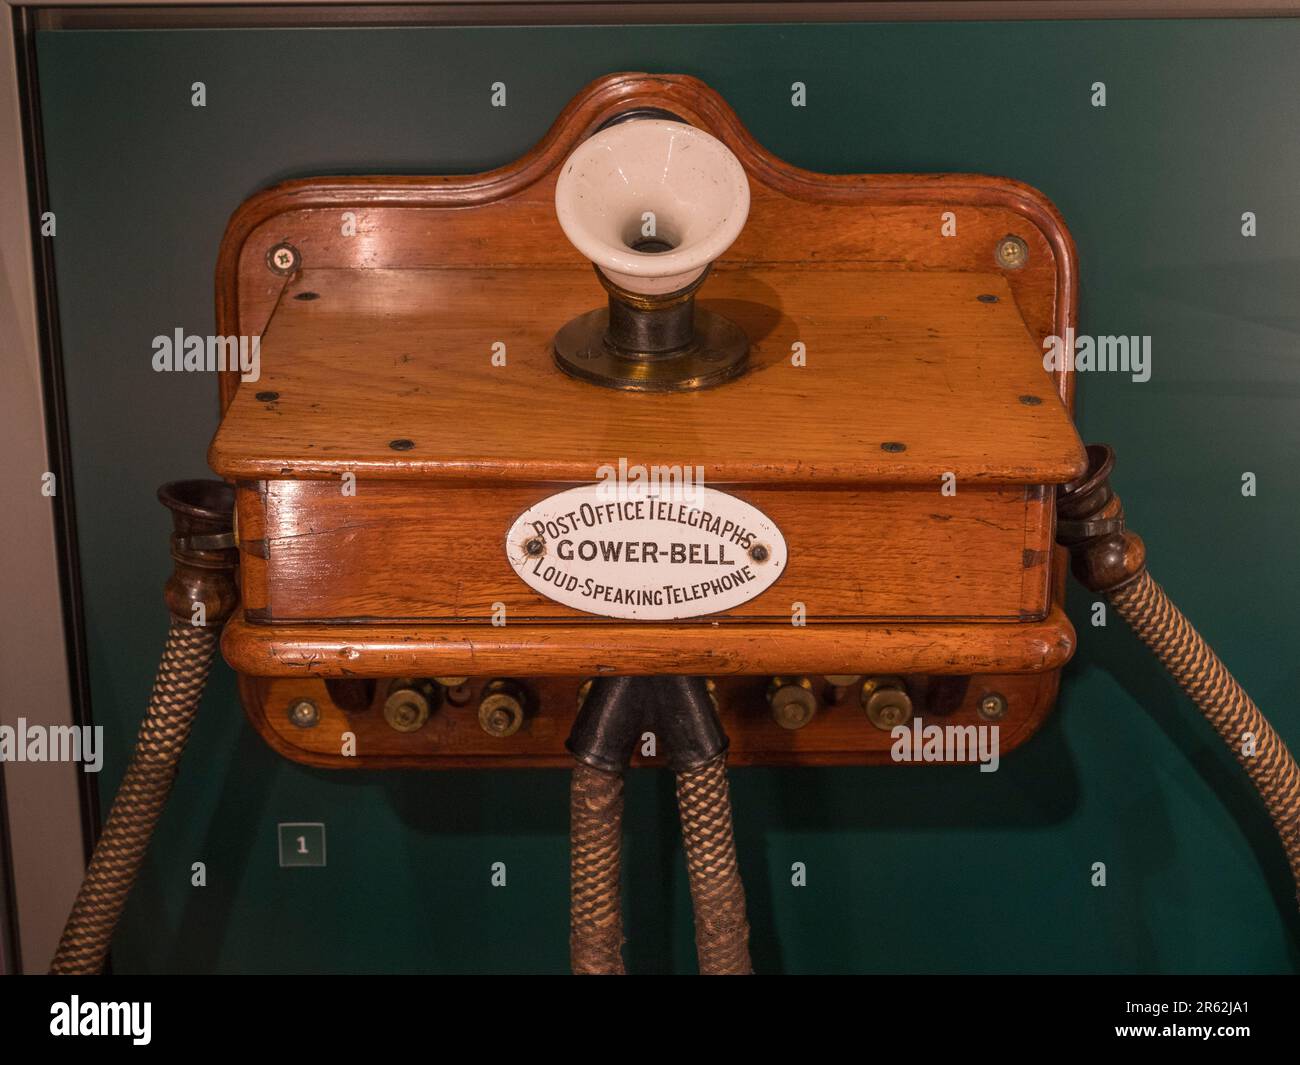 A Post Office telegraphs Gower-Bell loud speaking telephone (1881) on display in the Postal Museum in London, UK. Stock Photo